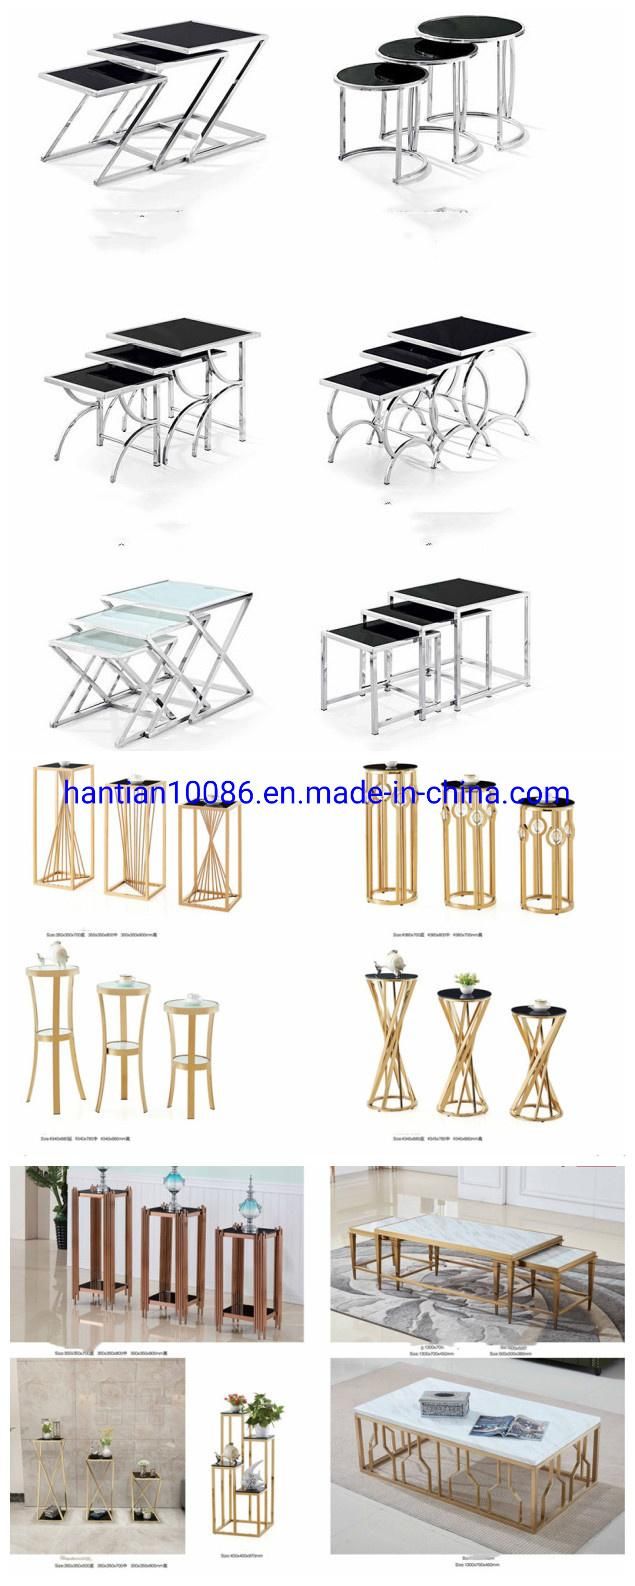 Hotel Furniture Tables Gold Stainless Steel Dining Table Marble Top Coffee Table